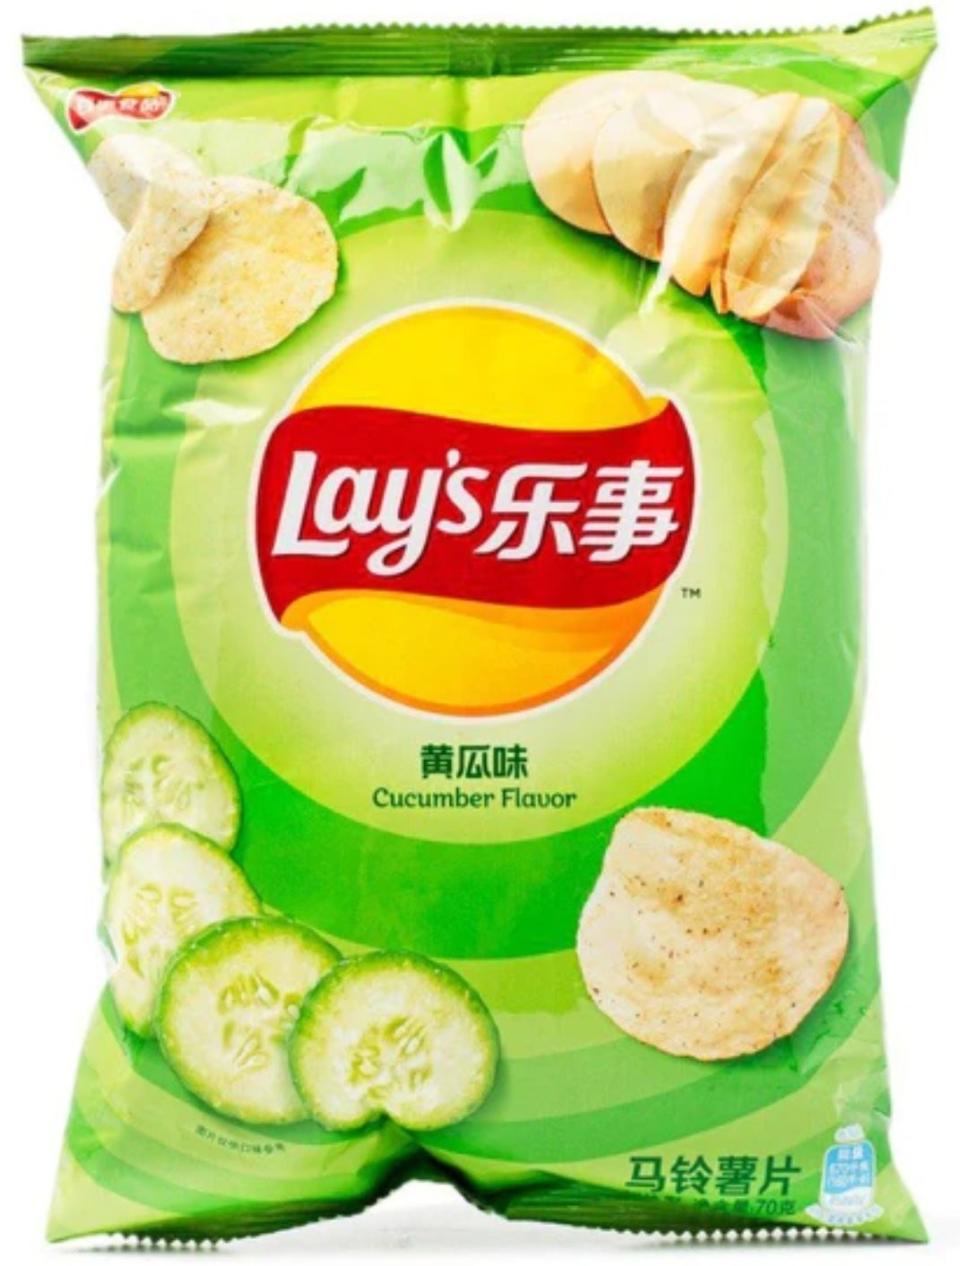 Cucumber-Flavored Lay's Potato Chips